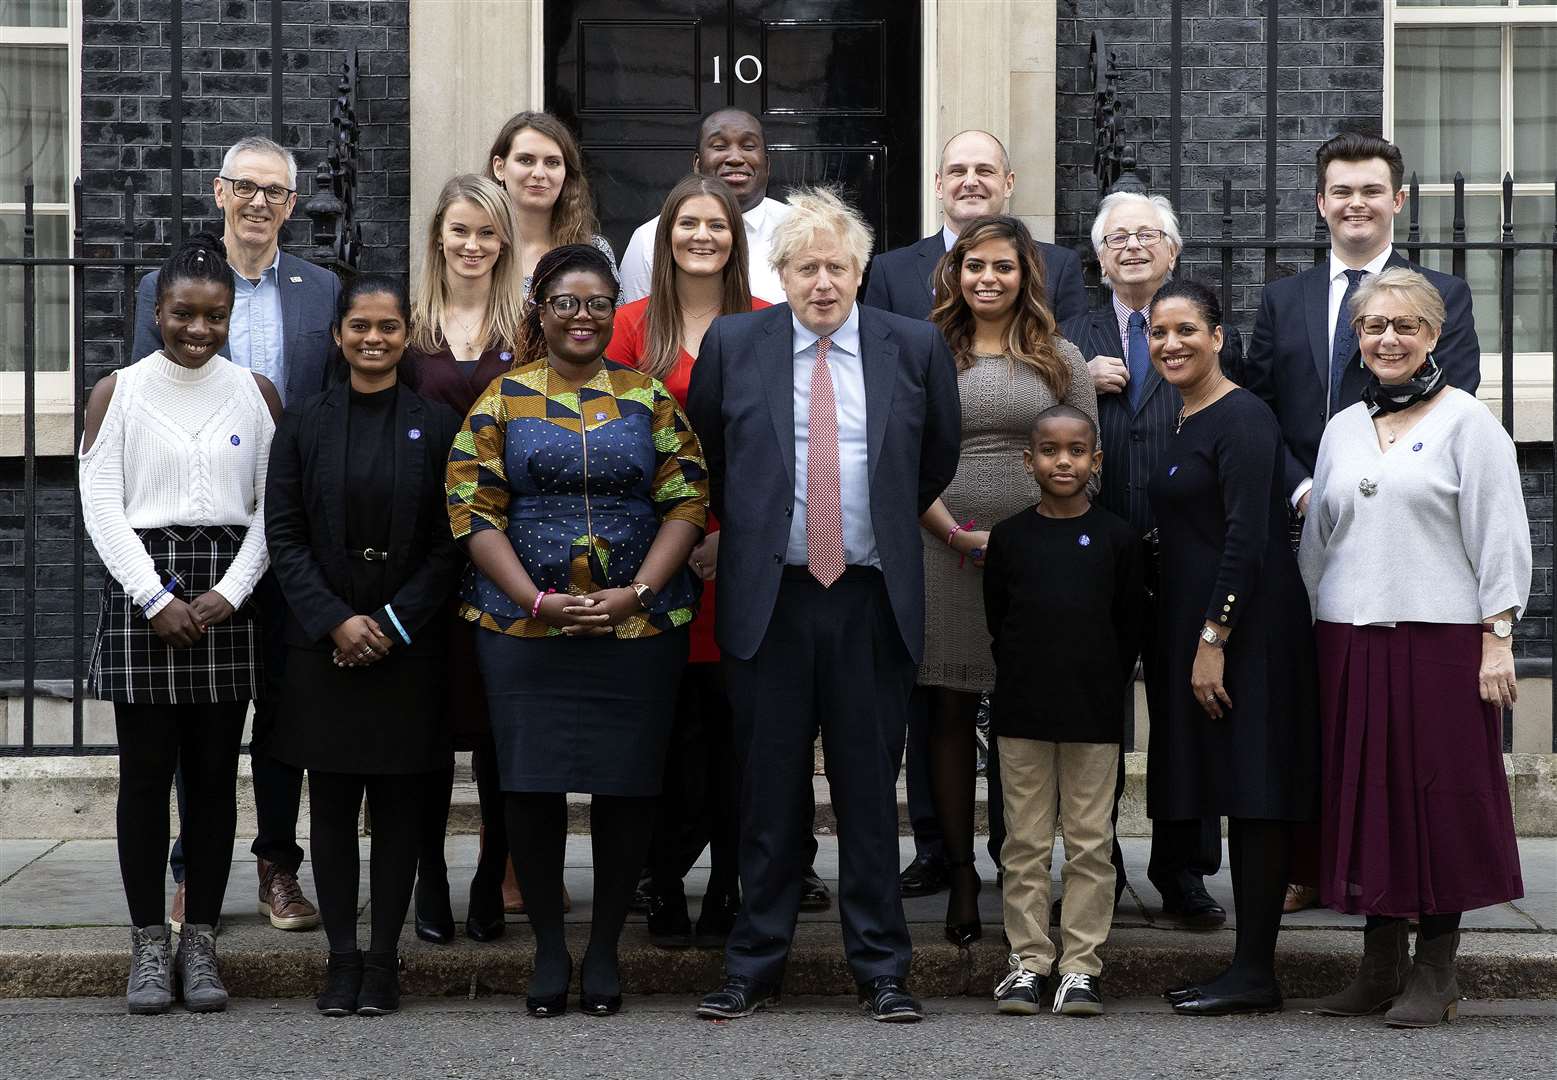 Josh Harrison and his mum, pictured second and third from the right in front row, travelled with Cancer Research UK campaigners to meet Boris Johnson. Picture: ©No10 Crown